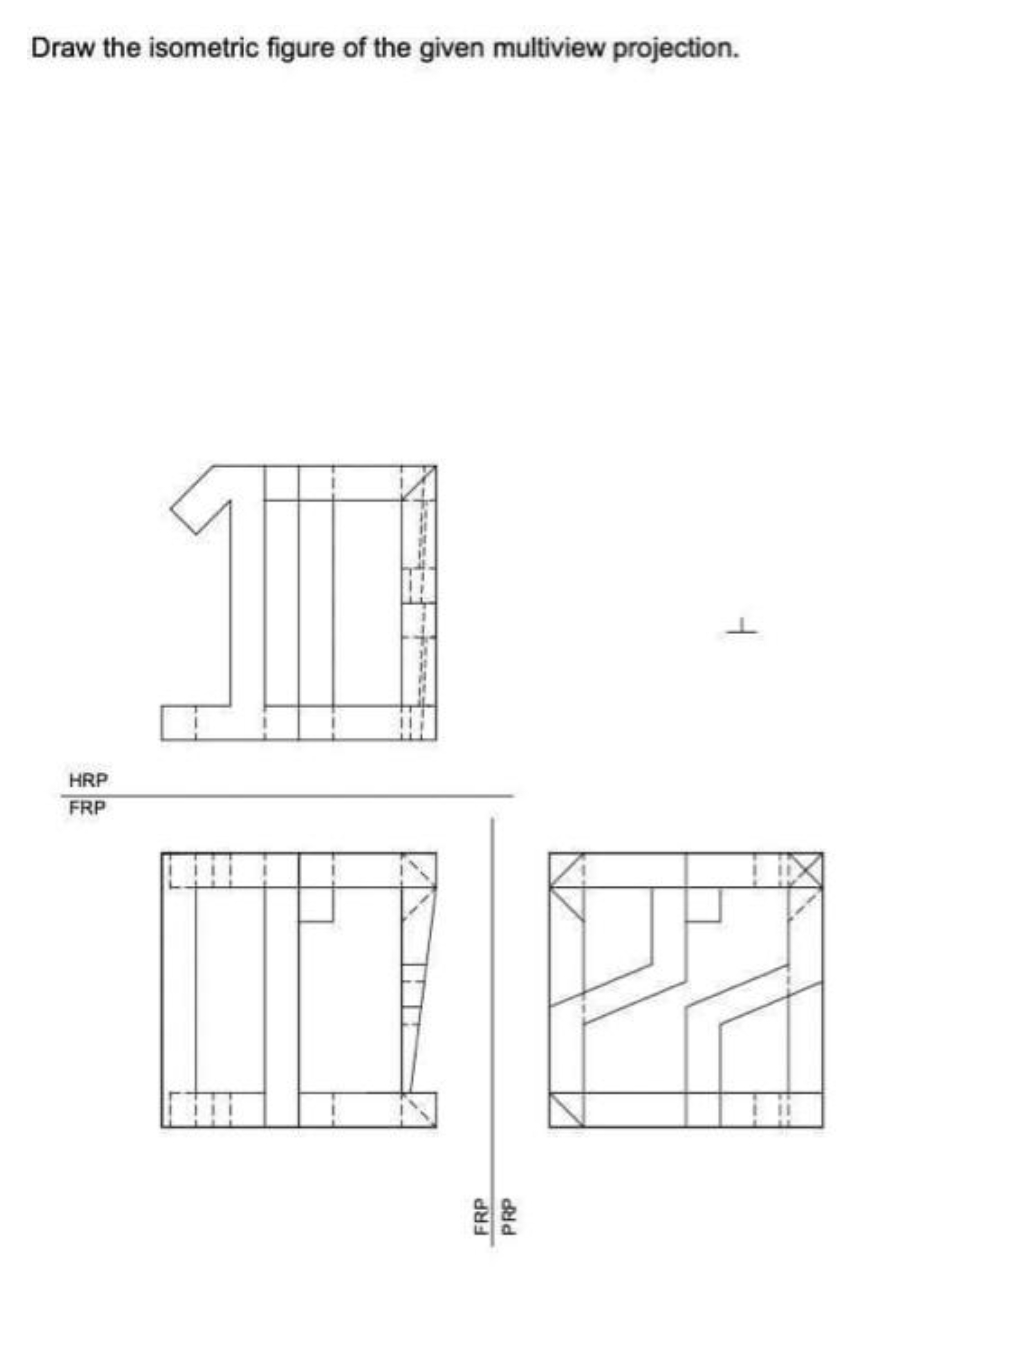 Draw the isometric figure of the given multiview projection.
HRP
FRP
FRP
PRP
